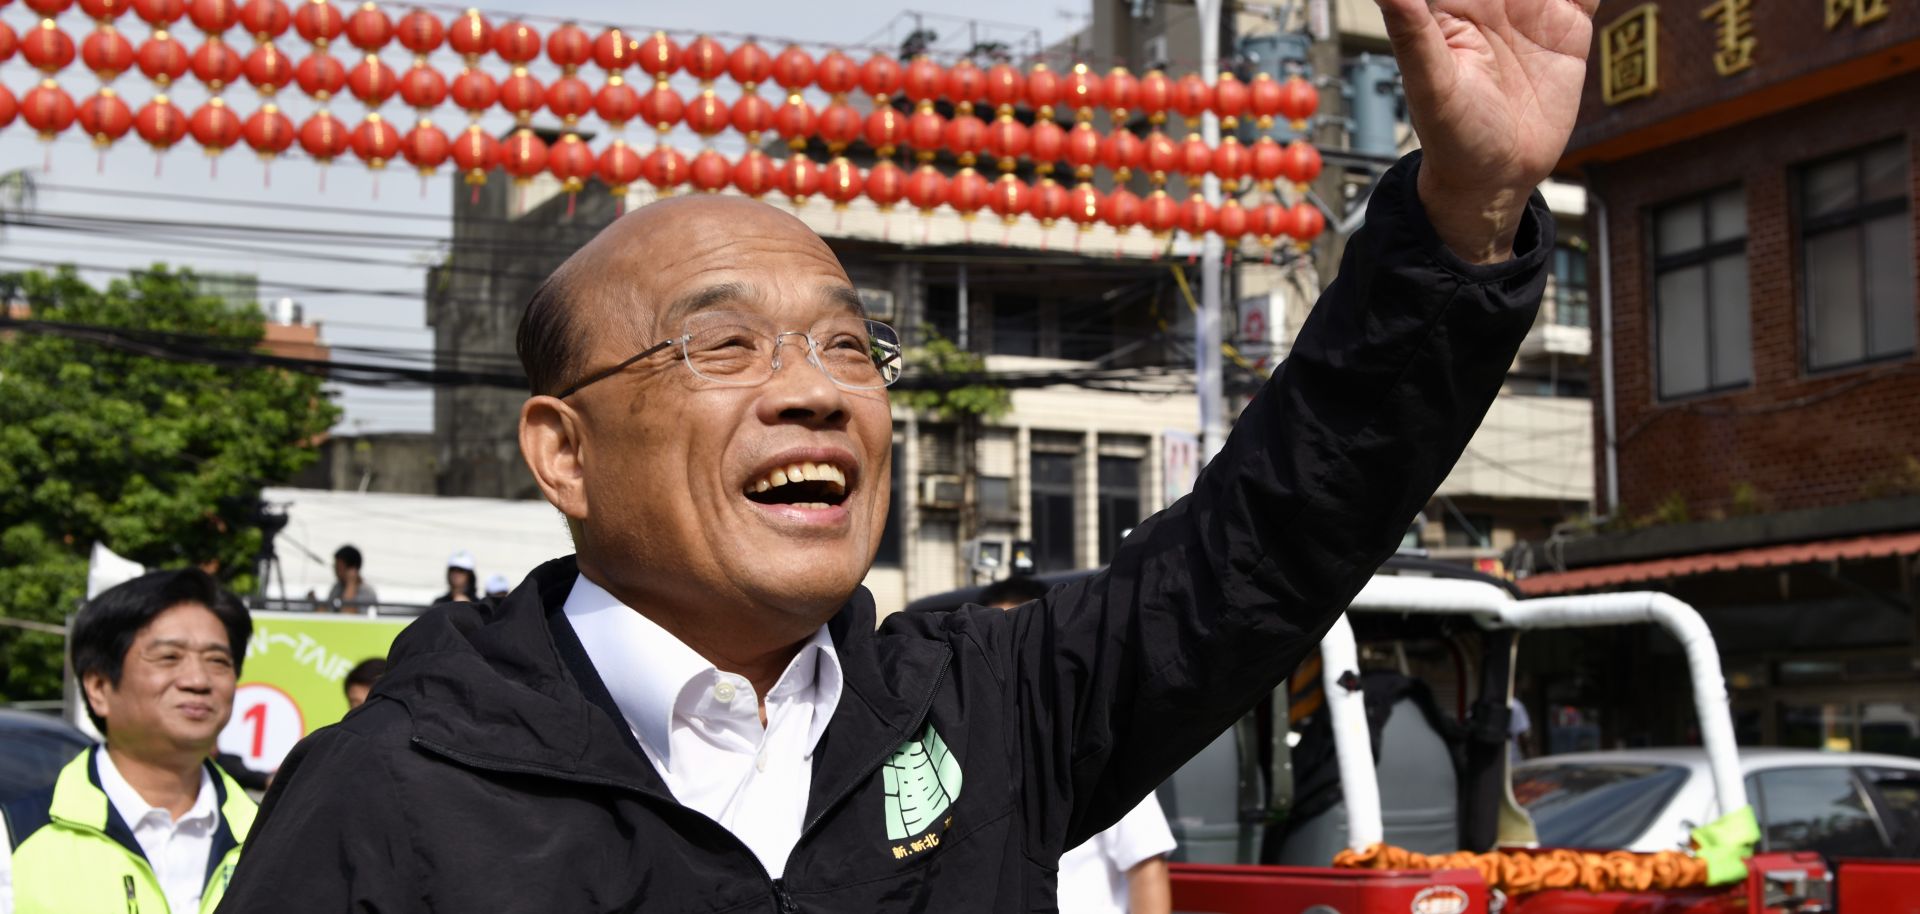 Su Tseng-chang, New Taipei mayor candidate from the ruling Democratic Progressive Party (DPP), waving during the elections campaign.